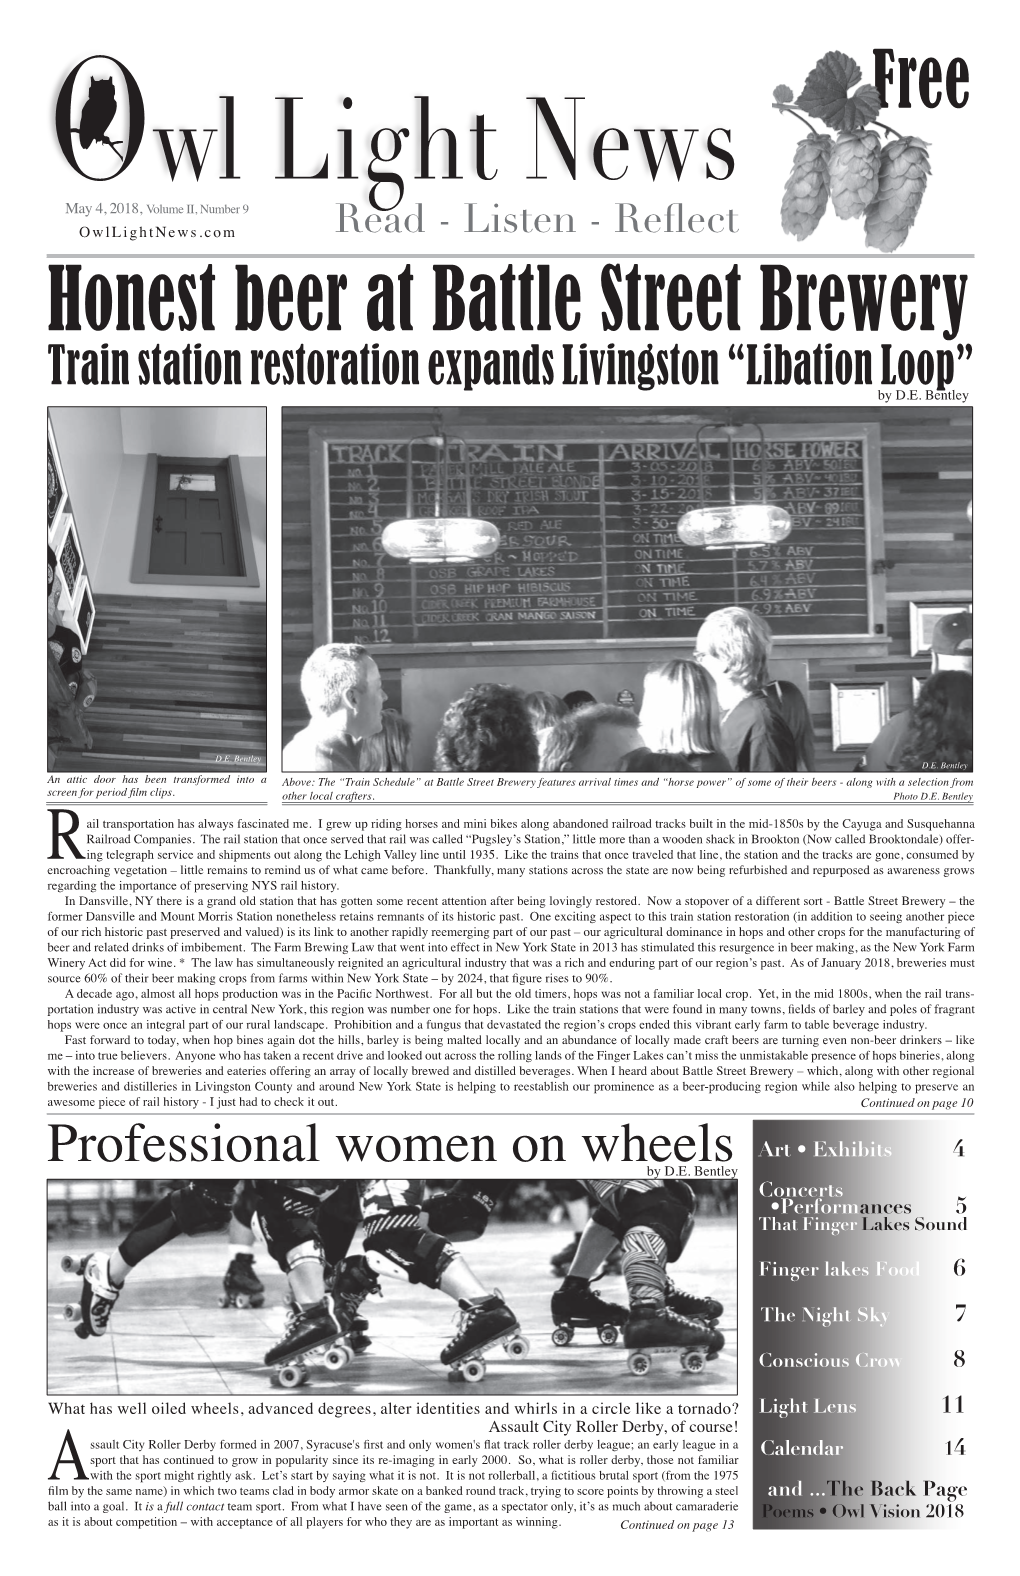 Honest Beer at Battle Street Brewery Train Station Restoration Expands Livingston “Libation Loop” by D.E